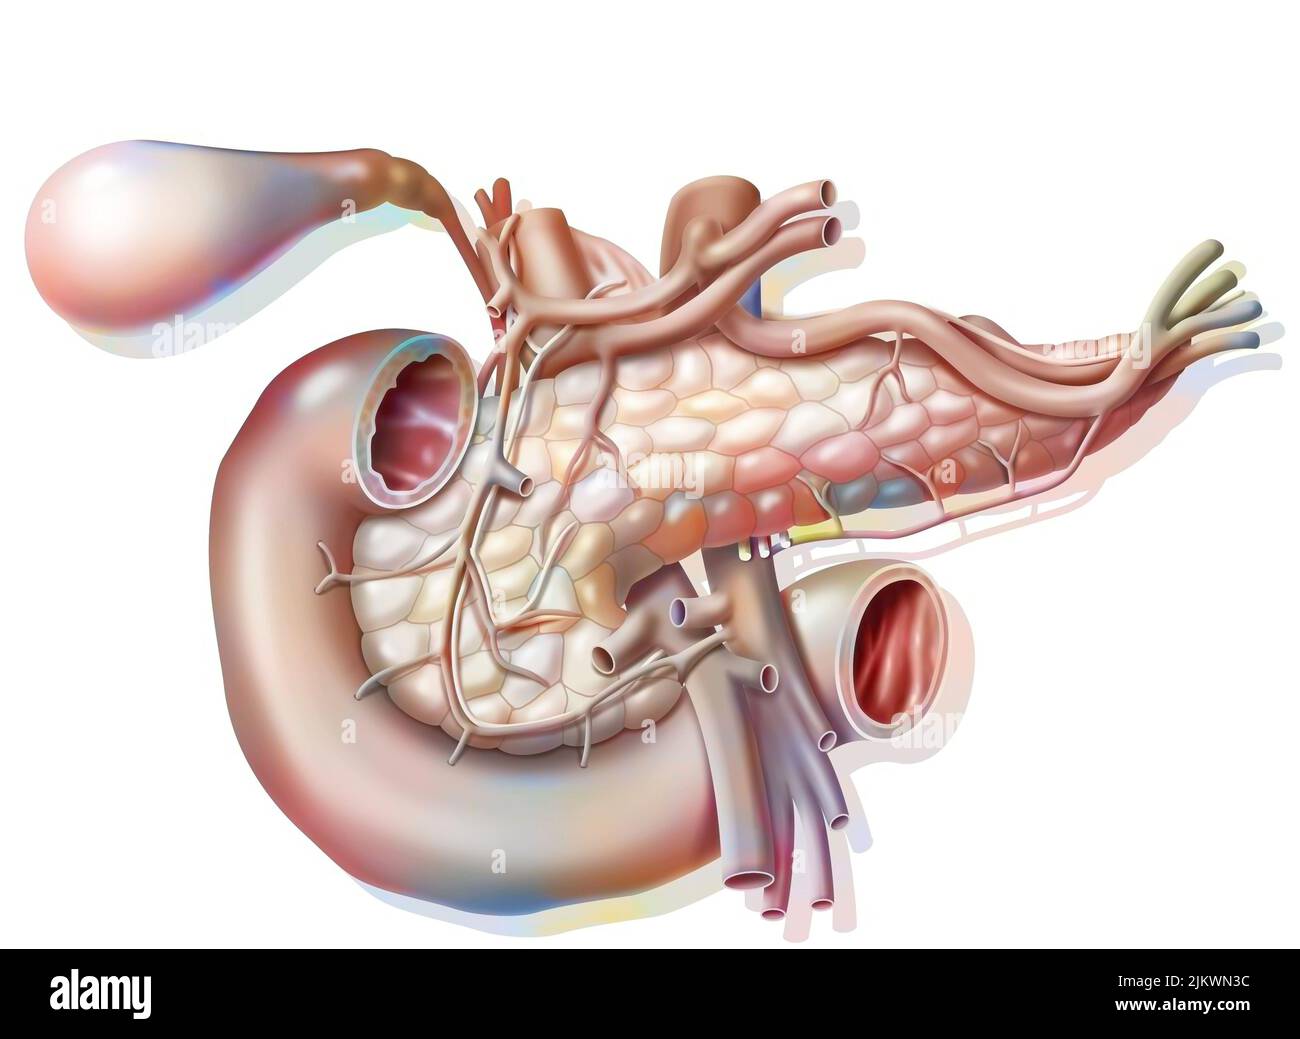 Vascularization of the pancreas in anterior view with vesicle and common bile duct. Stock Photo